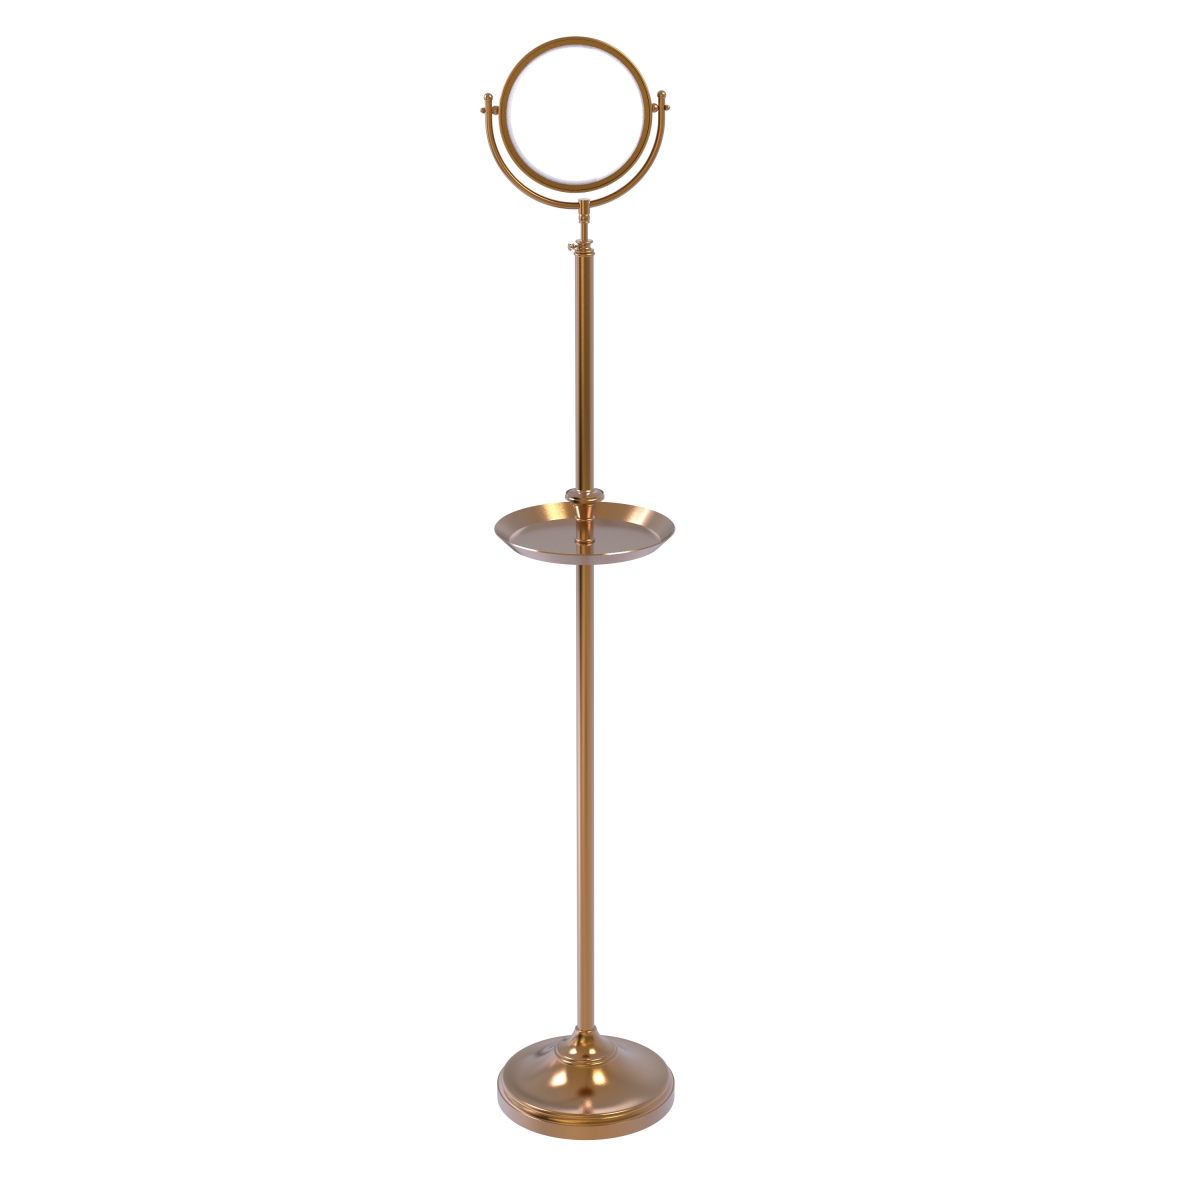 Allied Brass DMF-3-2X-BBR Floor Standing Make-Up Mirror 8 in. dia. with 2X Magnification & Shaving Tray, Brushed Bronze